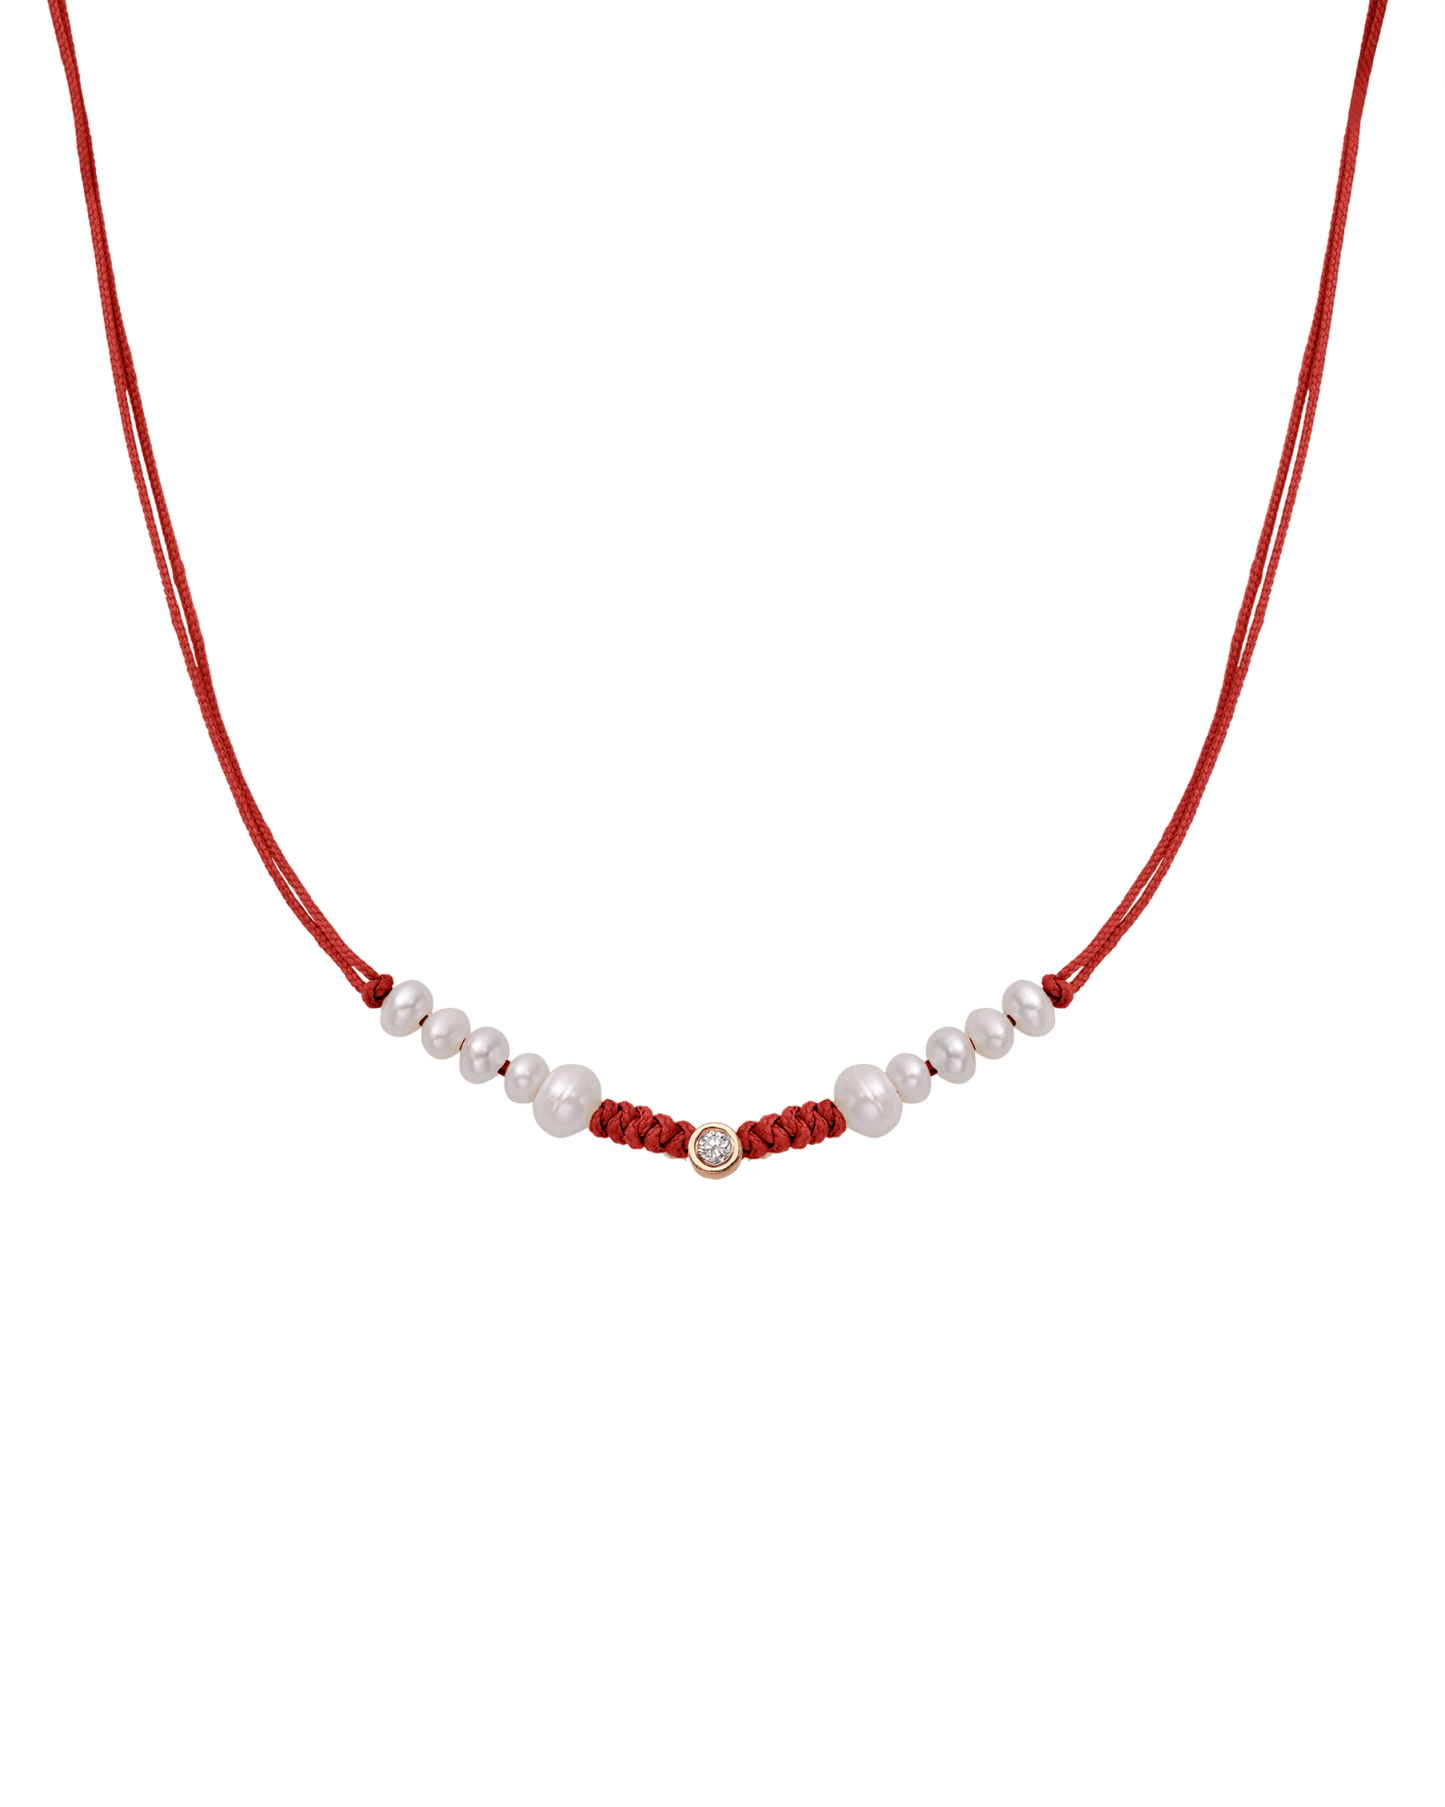 Ten Natural Pearl String of Love Necklace - 14K Rose Gold Necklaces 14K Solid Gold Red Medium: 0.04ct 